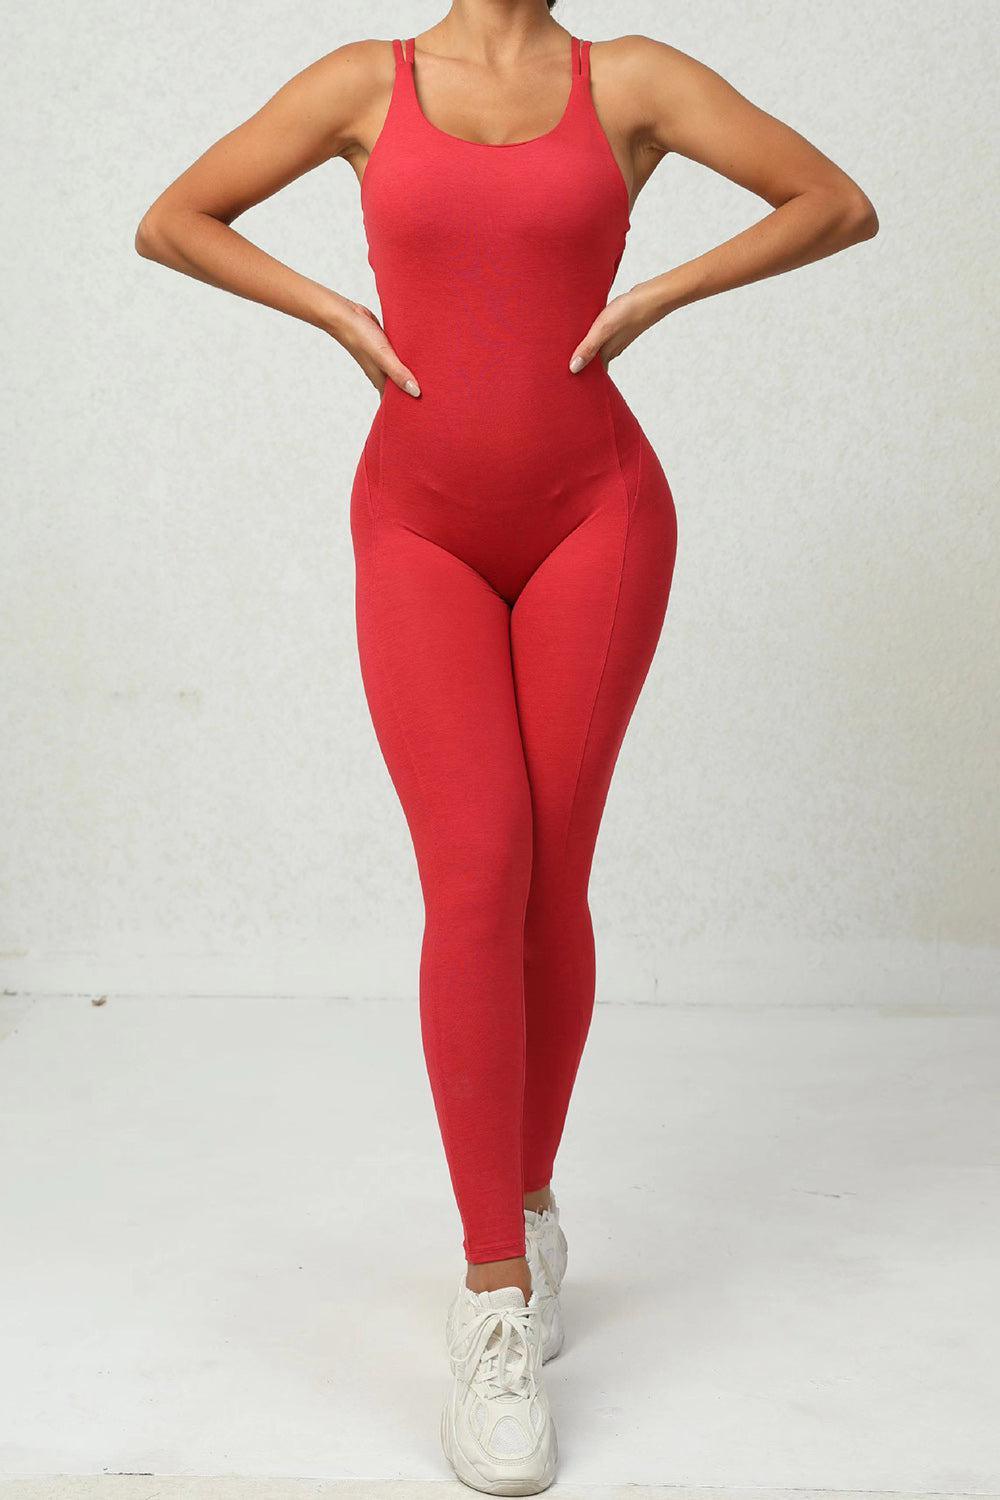 a woman in a red bodysuit posing for a picture